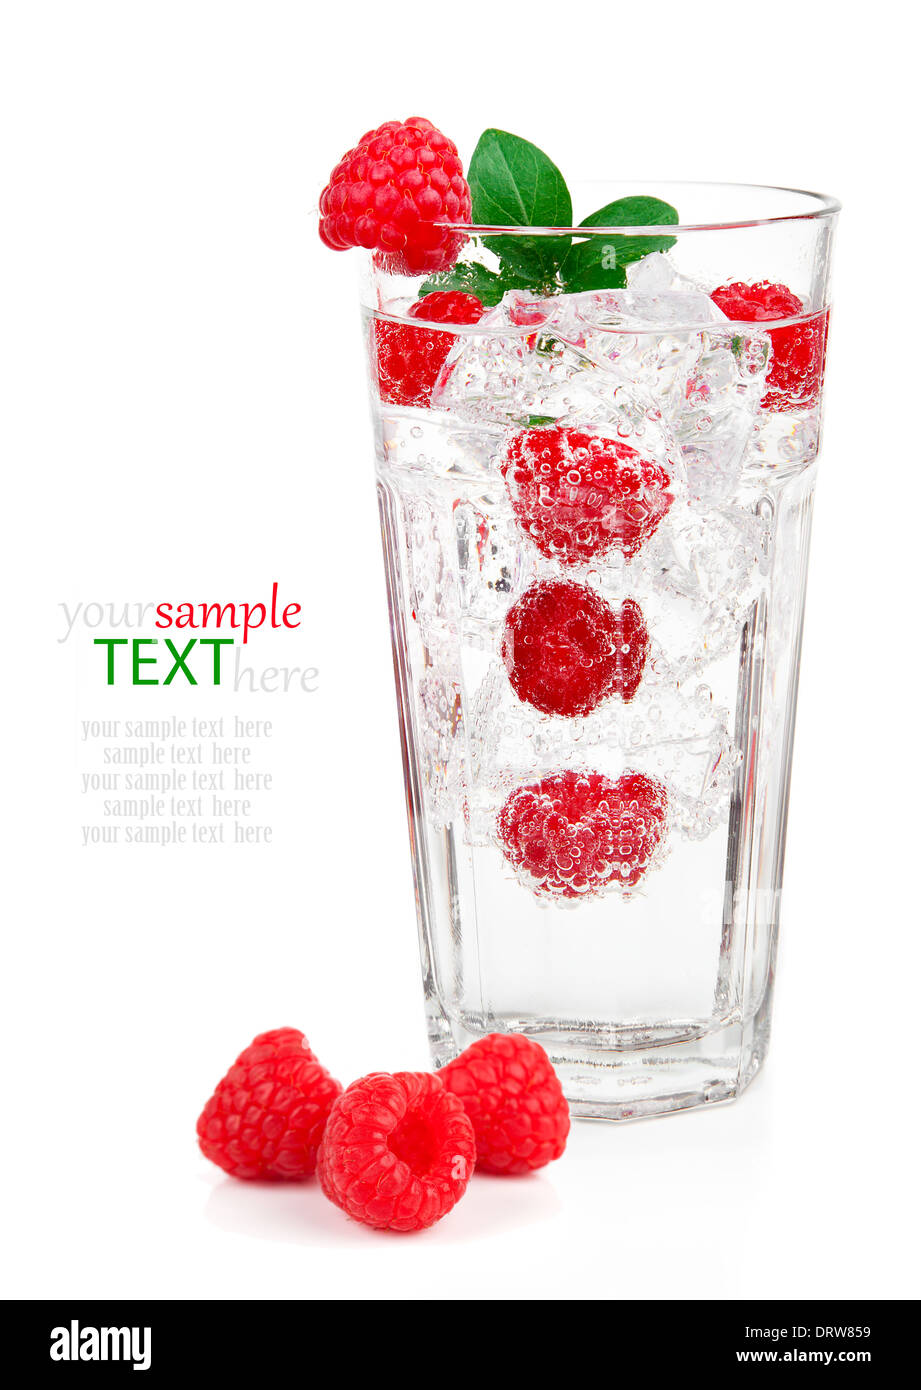 fresh cold drink water ice cubes raspberry, isolated on white background. Stock Photo